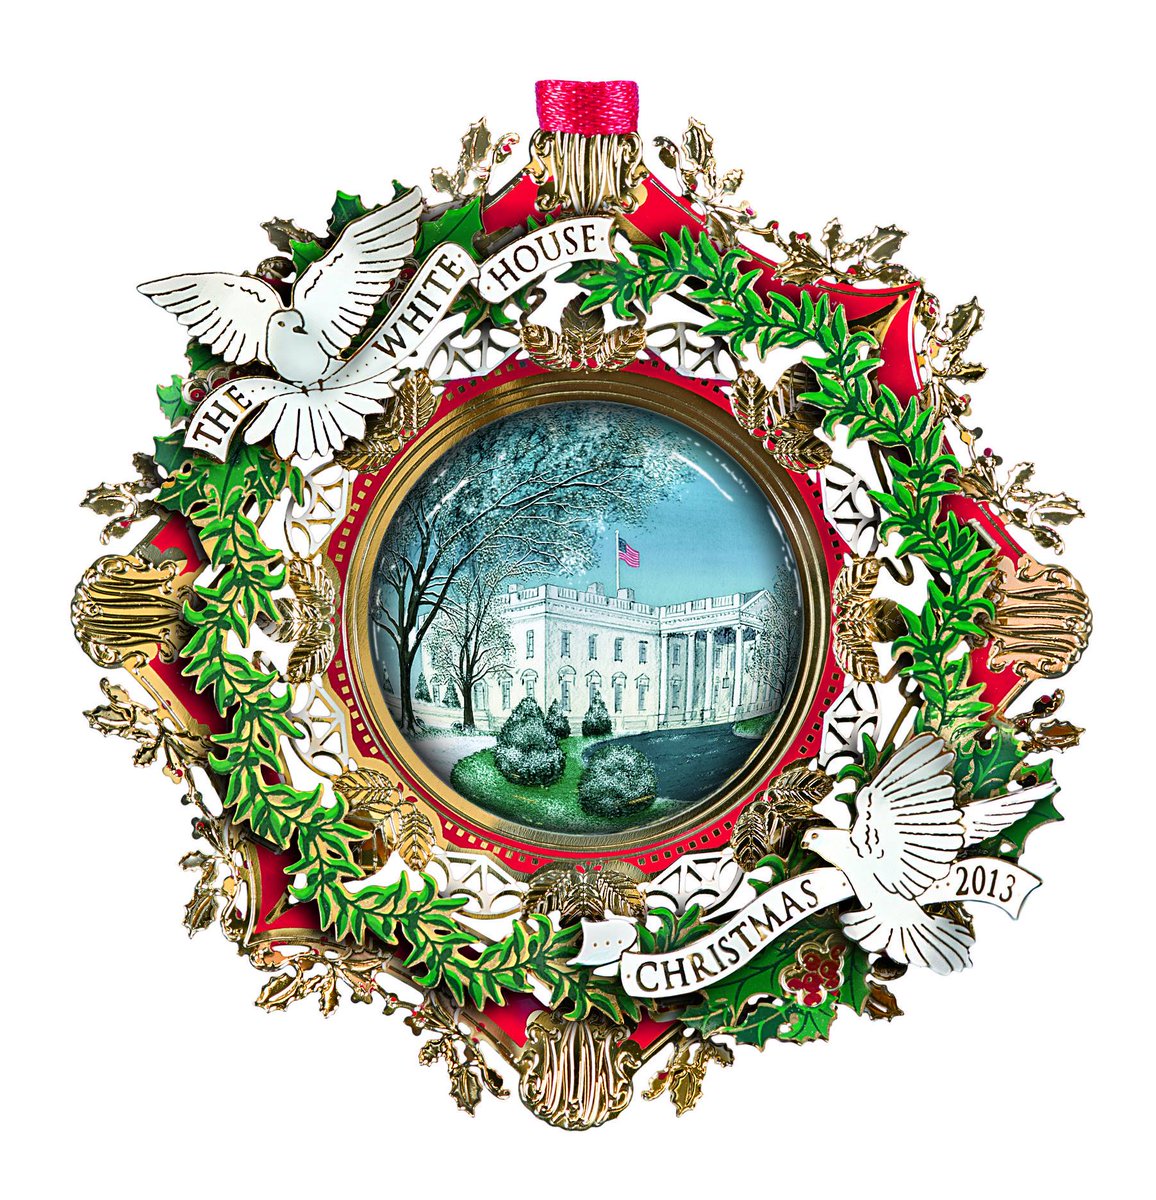 In 2013 ornament honors Woodrow Wilson and commemorates his quest for world peace after the events of World War I. The snowy center scene is surrounded by a frame of elm and holly leaves, olive branches and peace doves.Buy yours:  https://shop.whitehousehistory.org/holidays/ornaments/the-2013-white-house-christmas-ornament